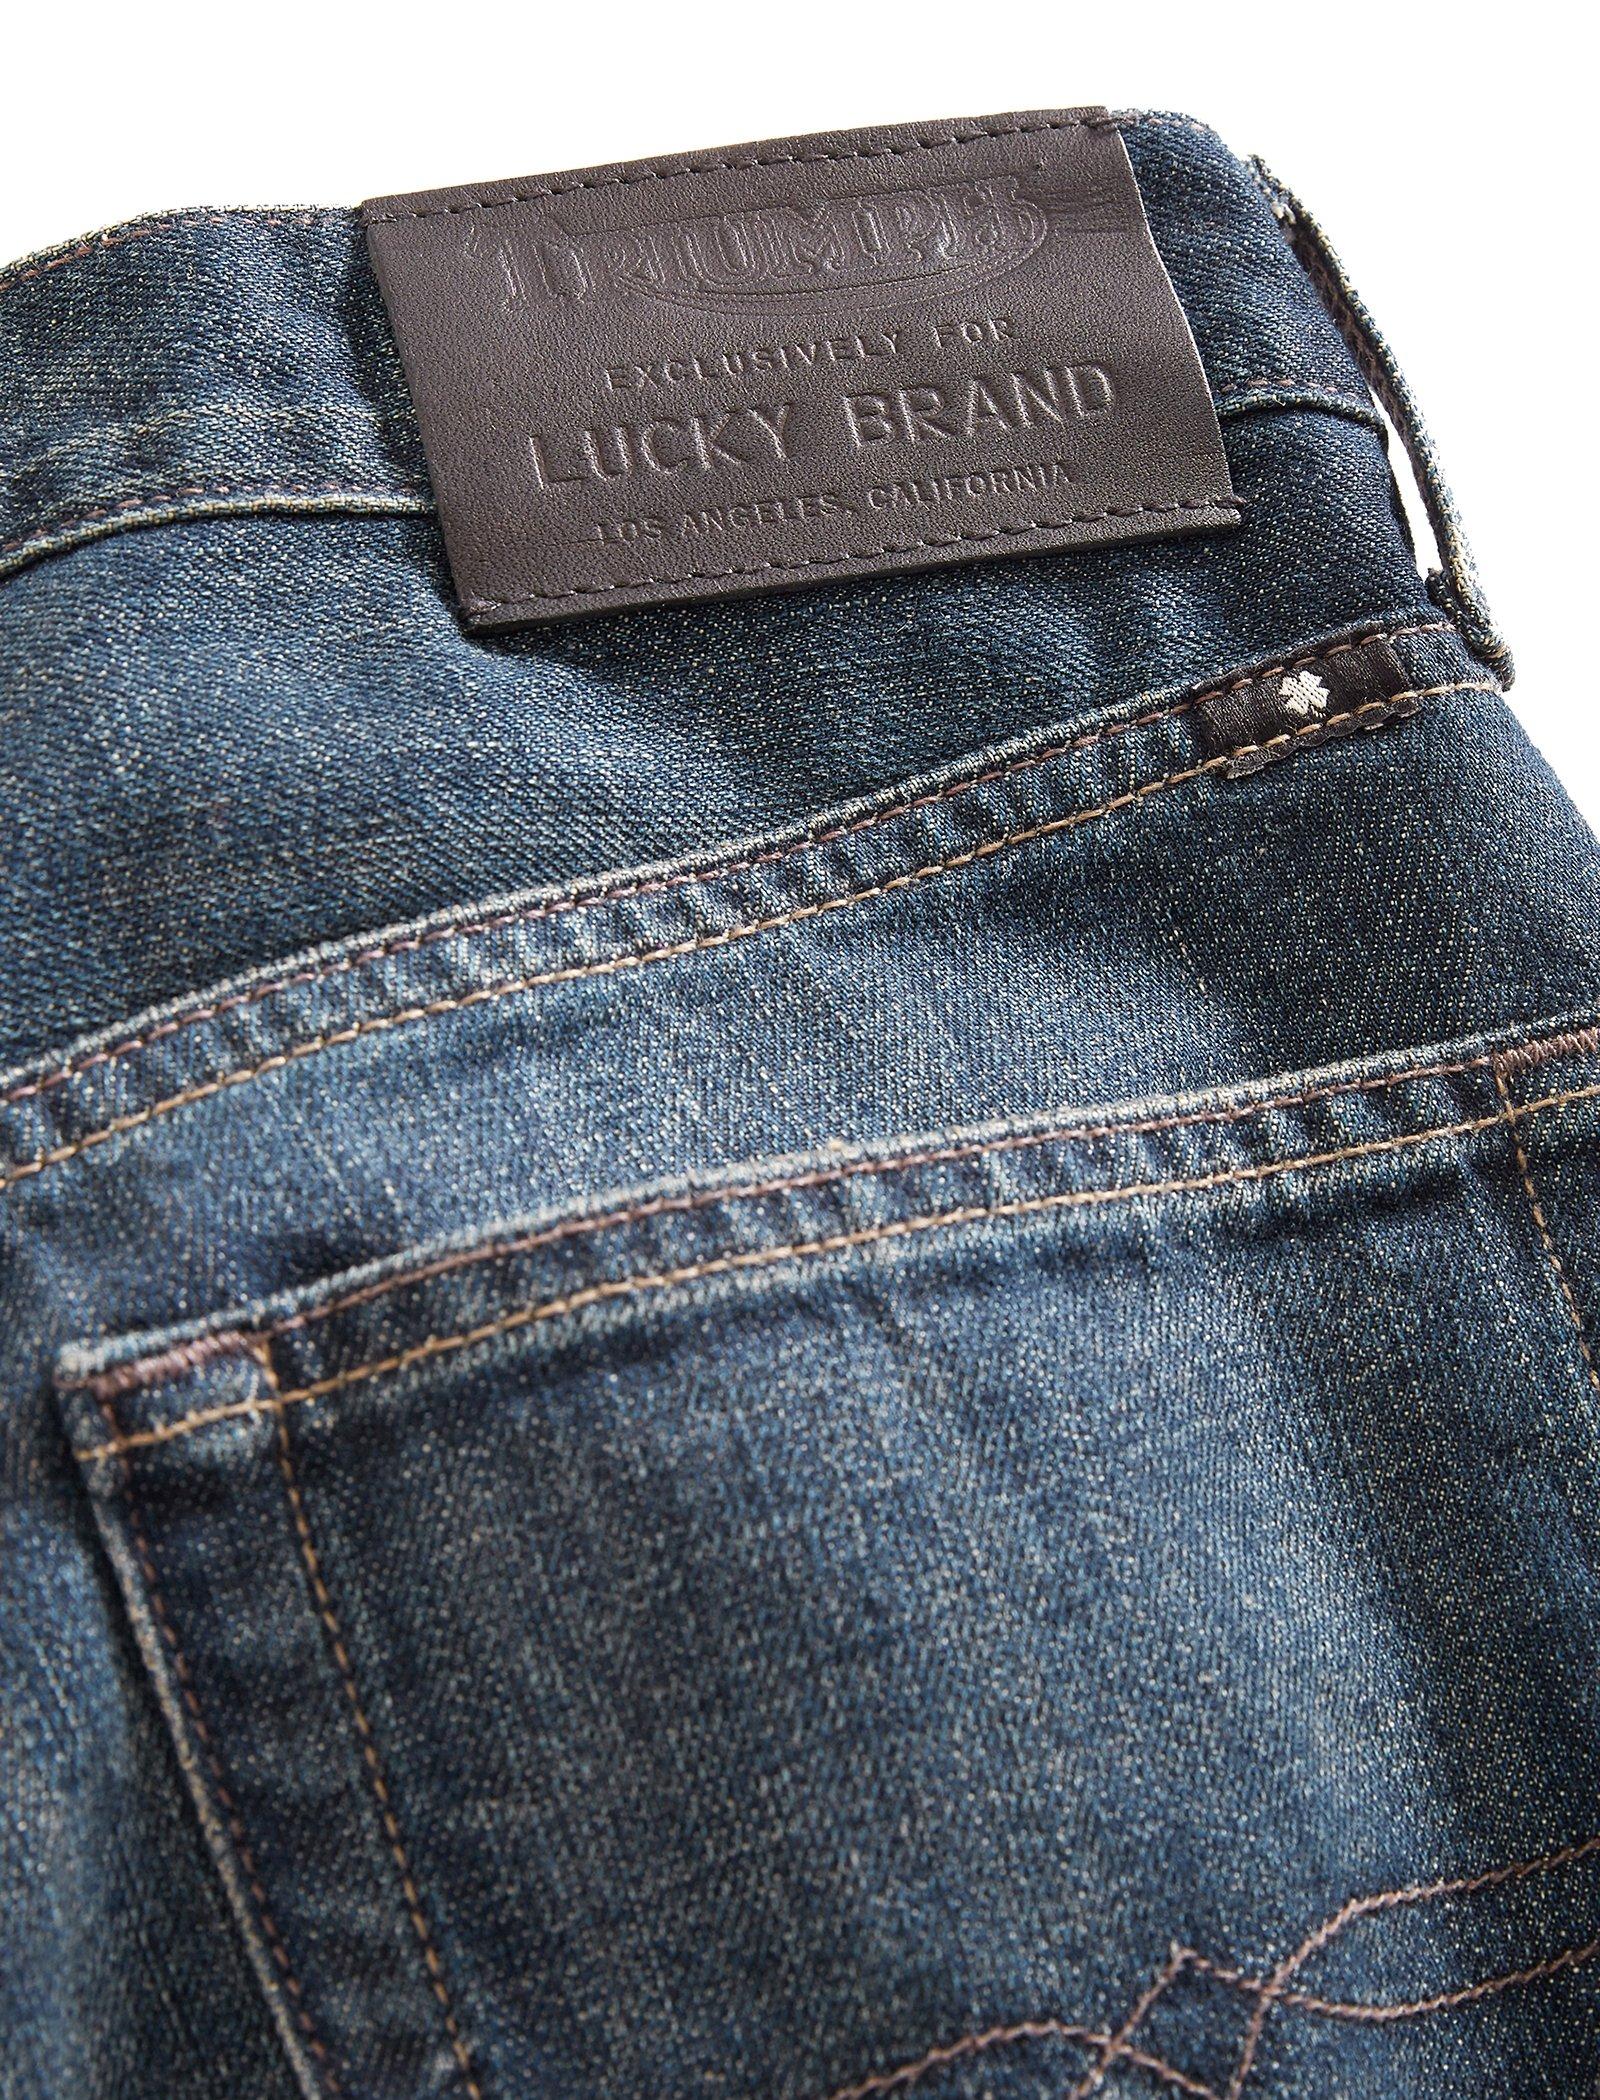 lucky brand 121 jeans